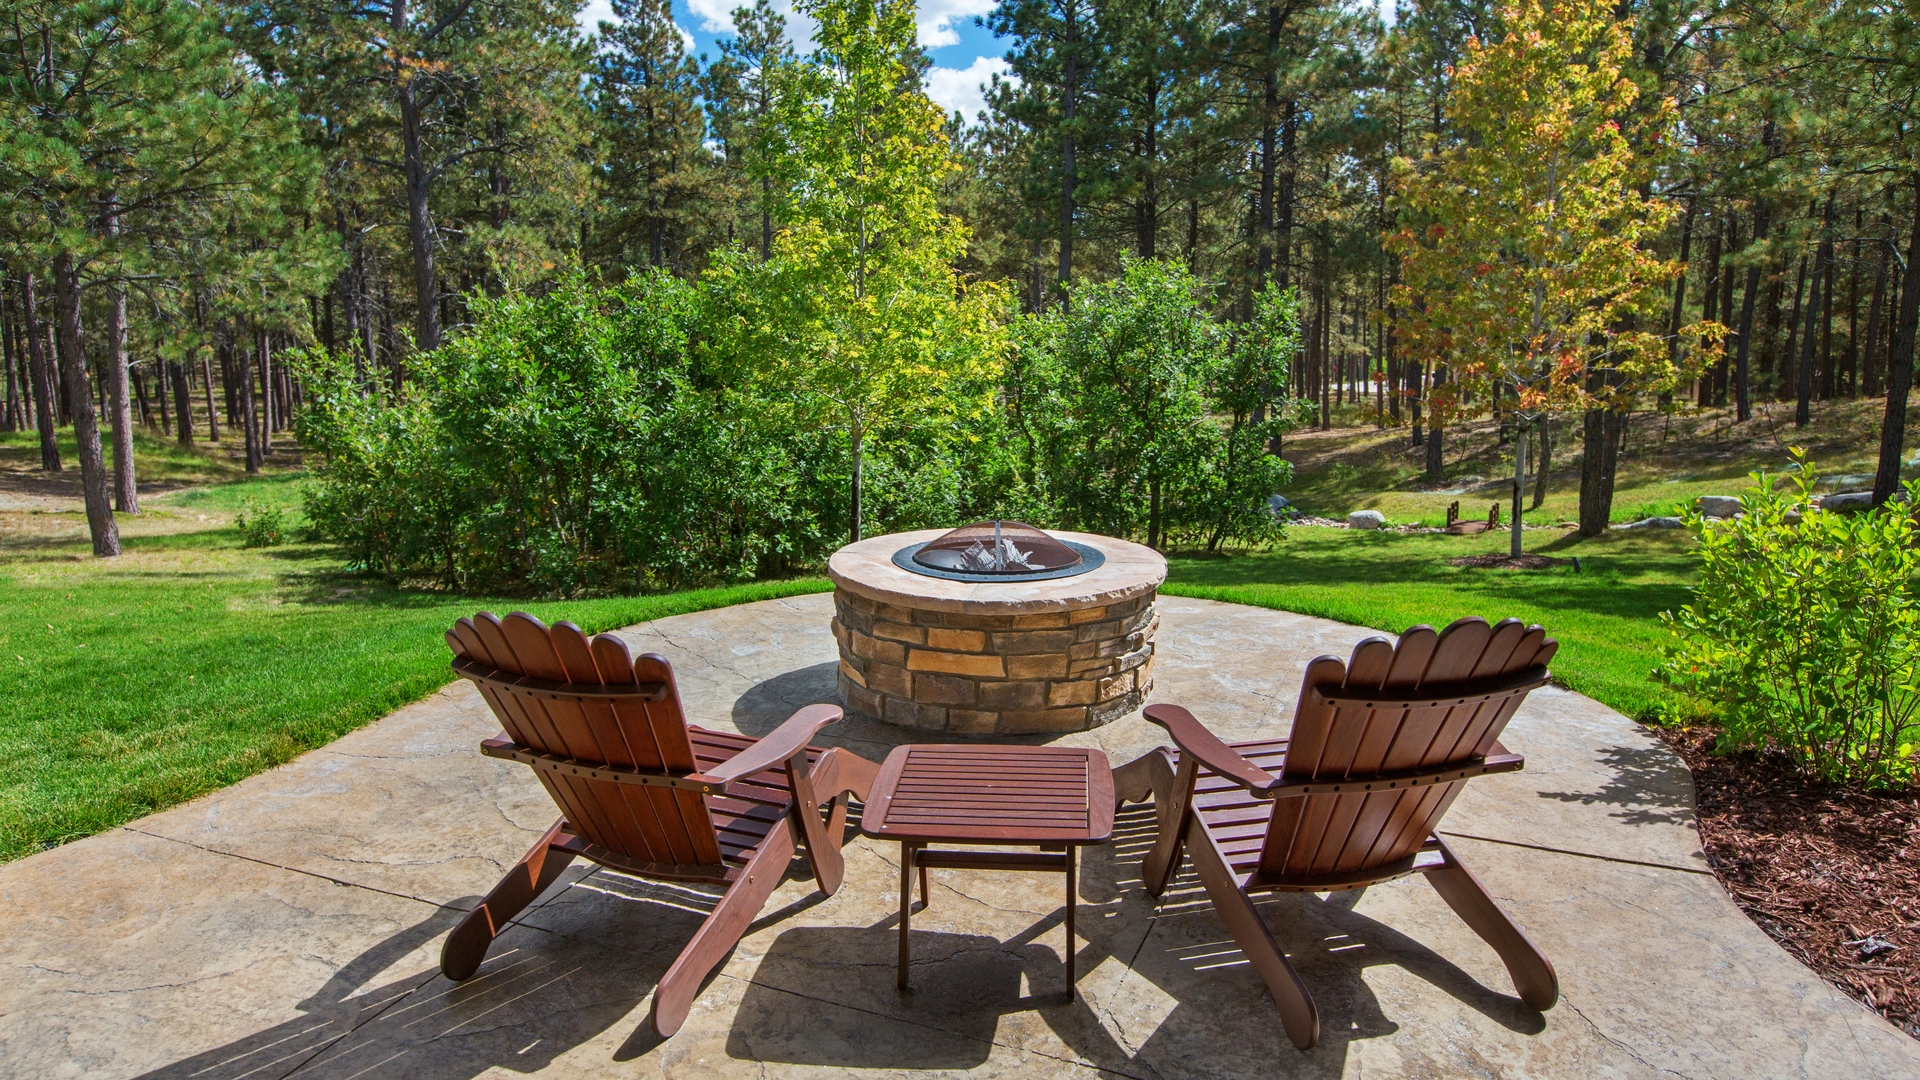 Should You Choose a Gas-Burning or Wood-Burning Fire Pit?